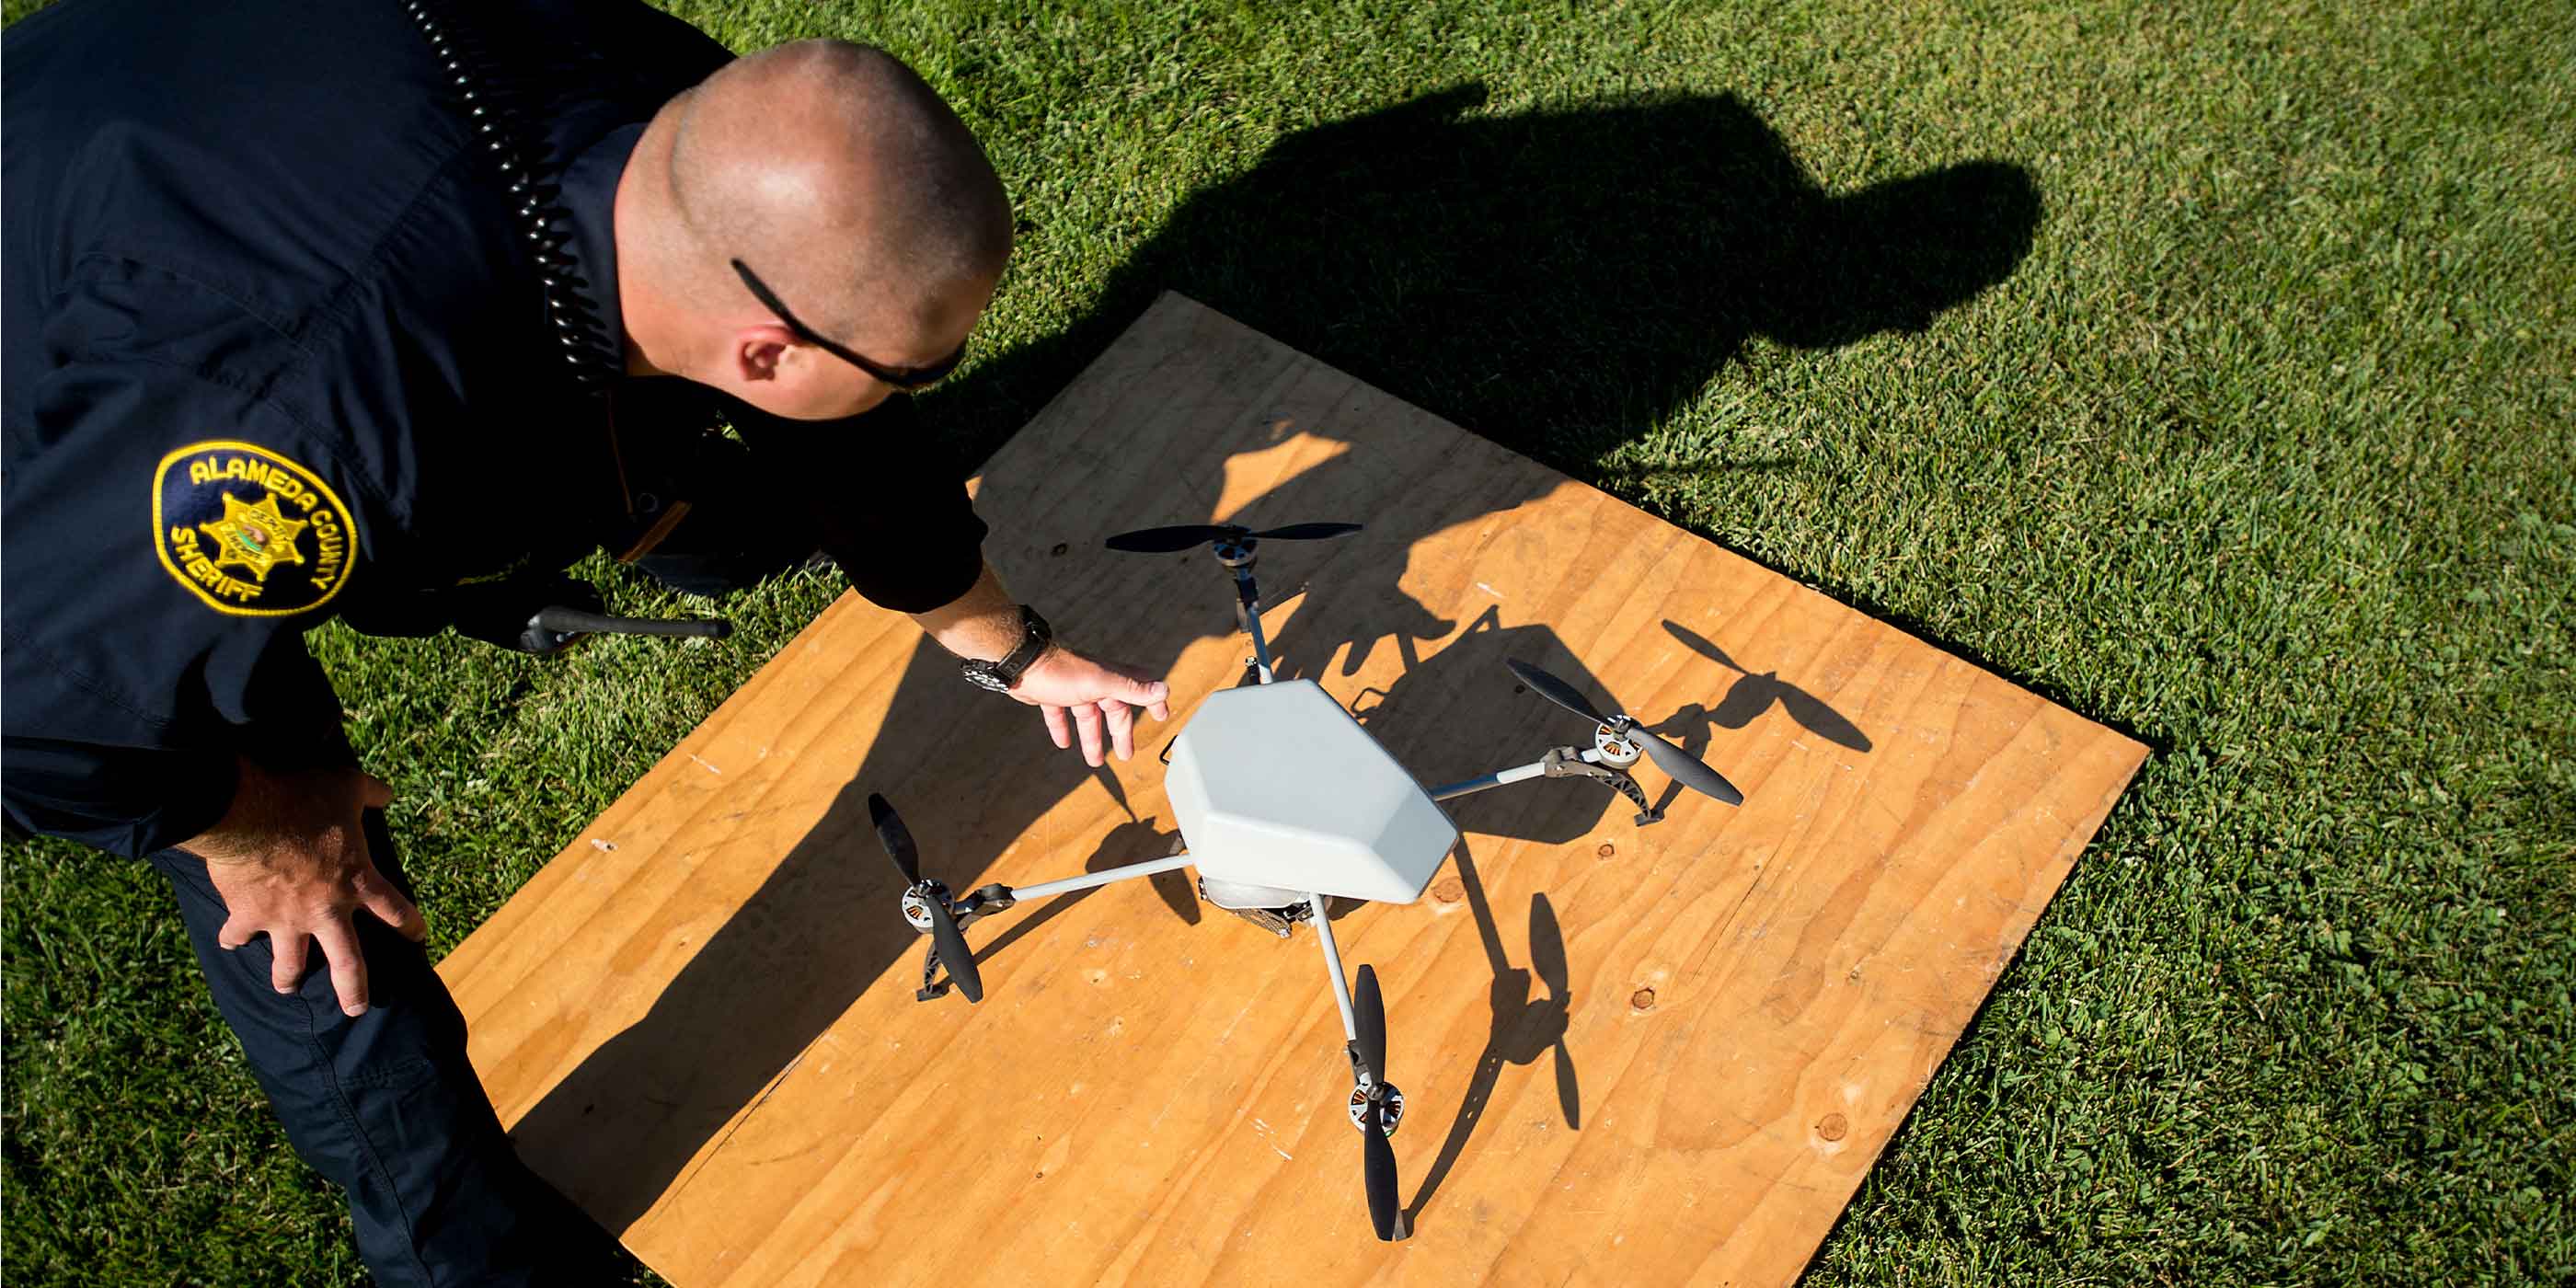 A sheriff's deputy to prepares to fly a drone for an aerial demonstration of the its capabilities.